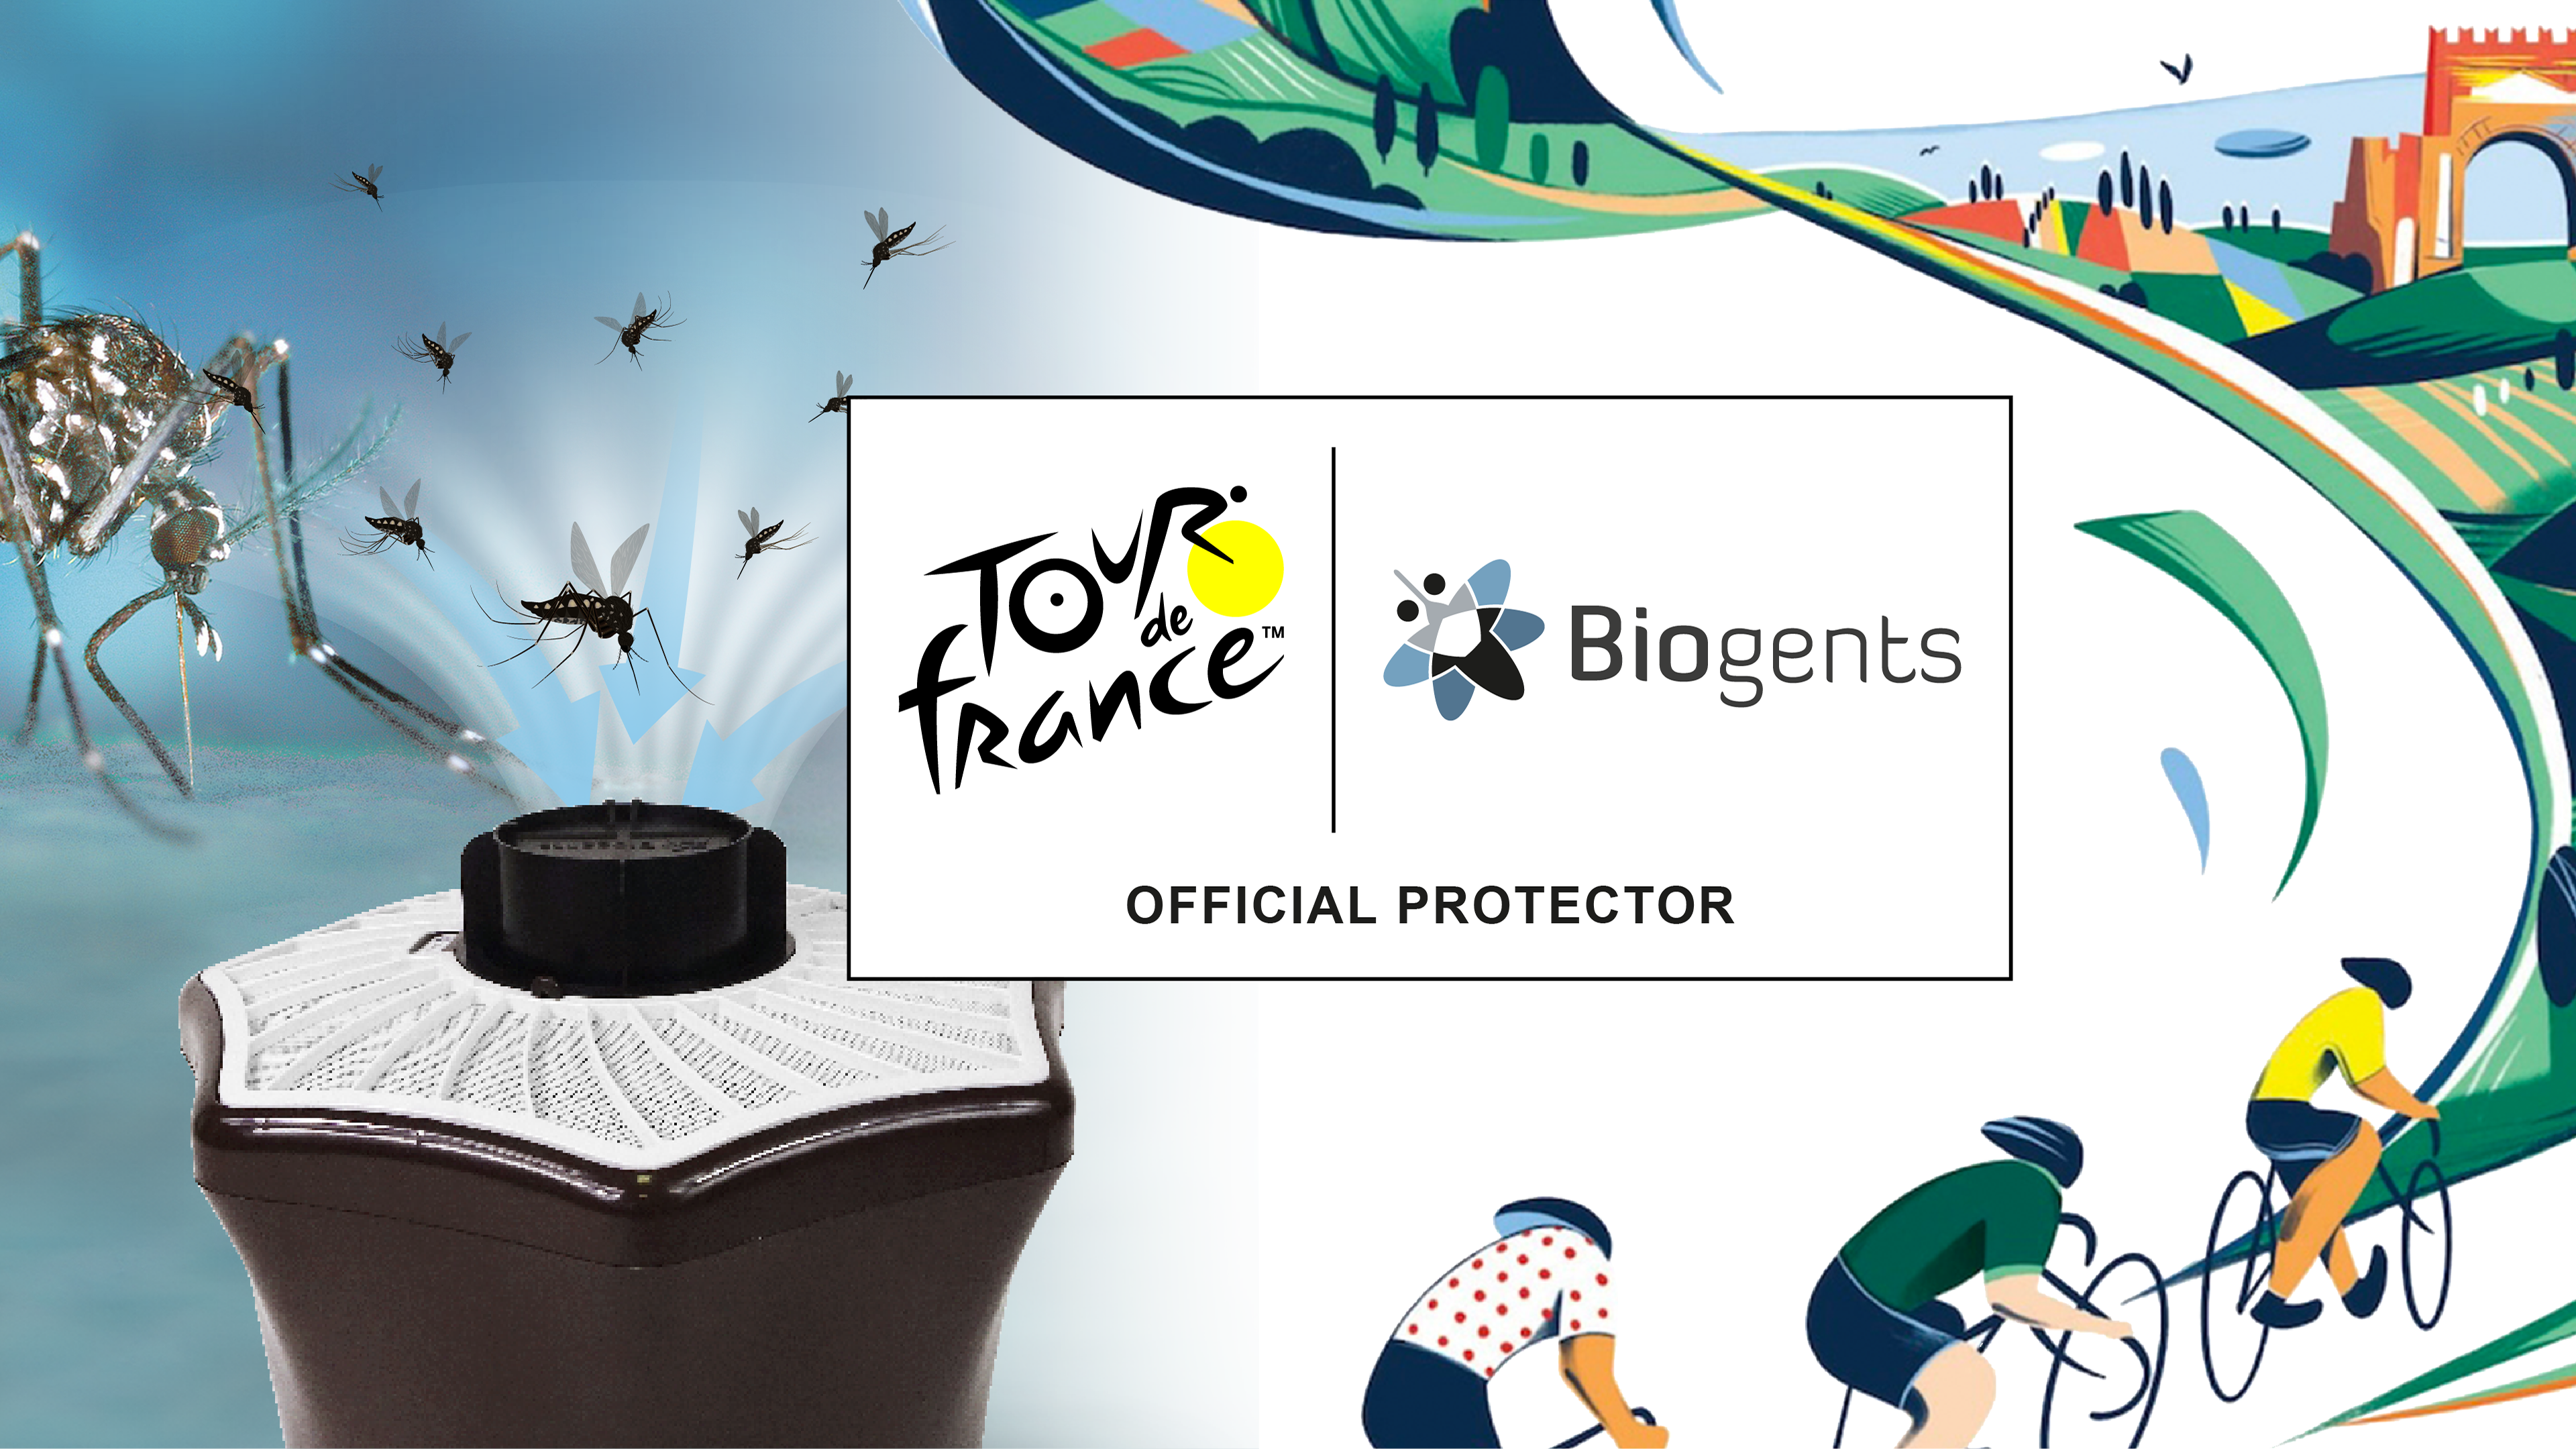 Biogents signs an exclusive partnership with the Tour de France and becomes an 